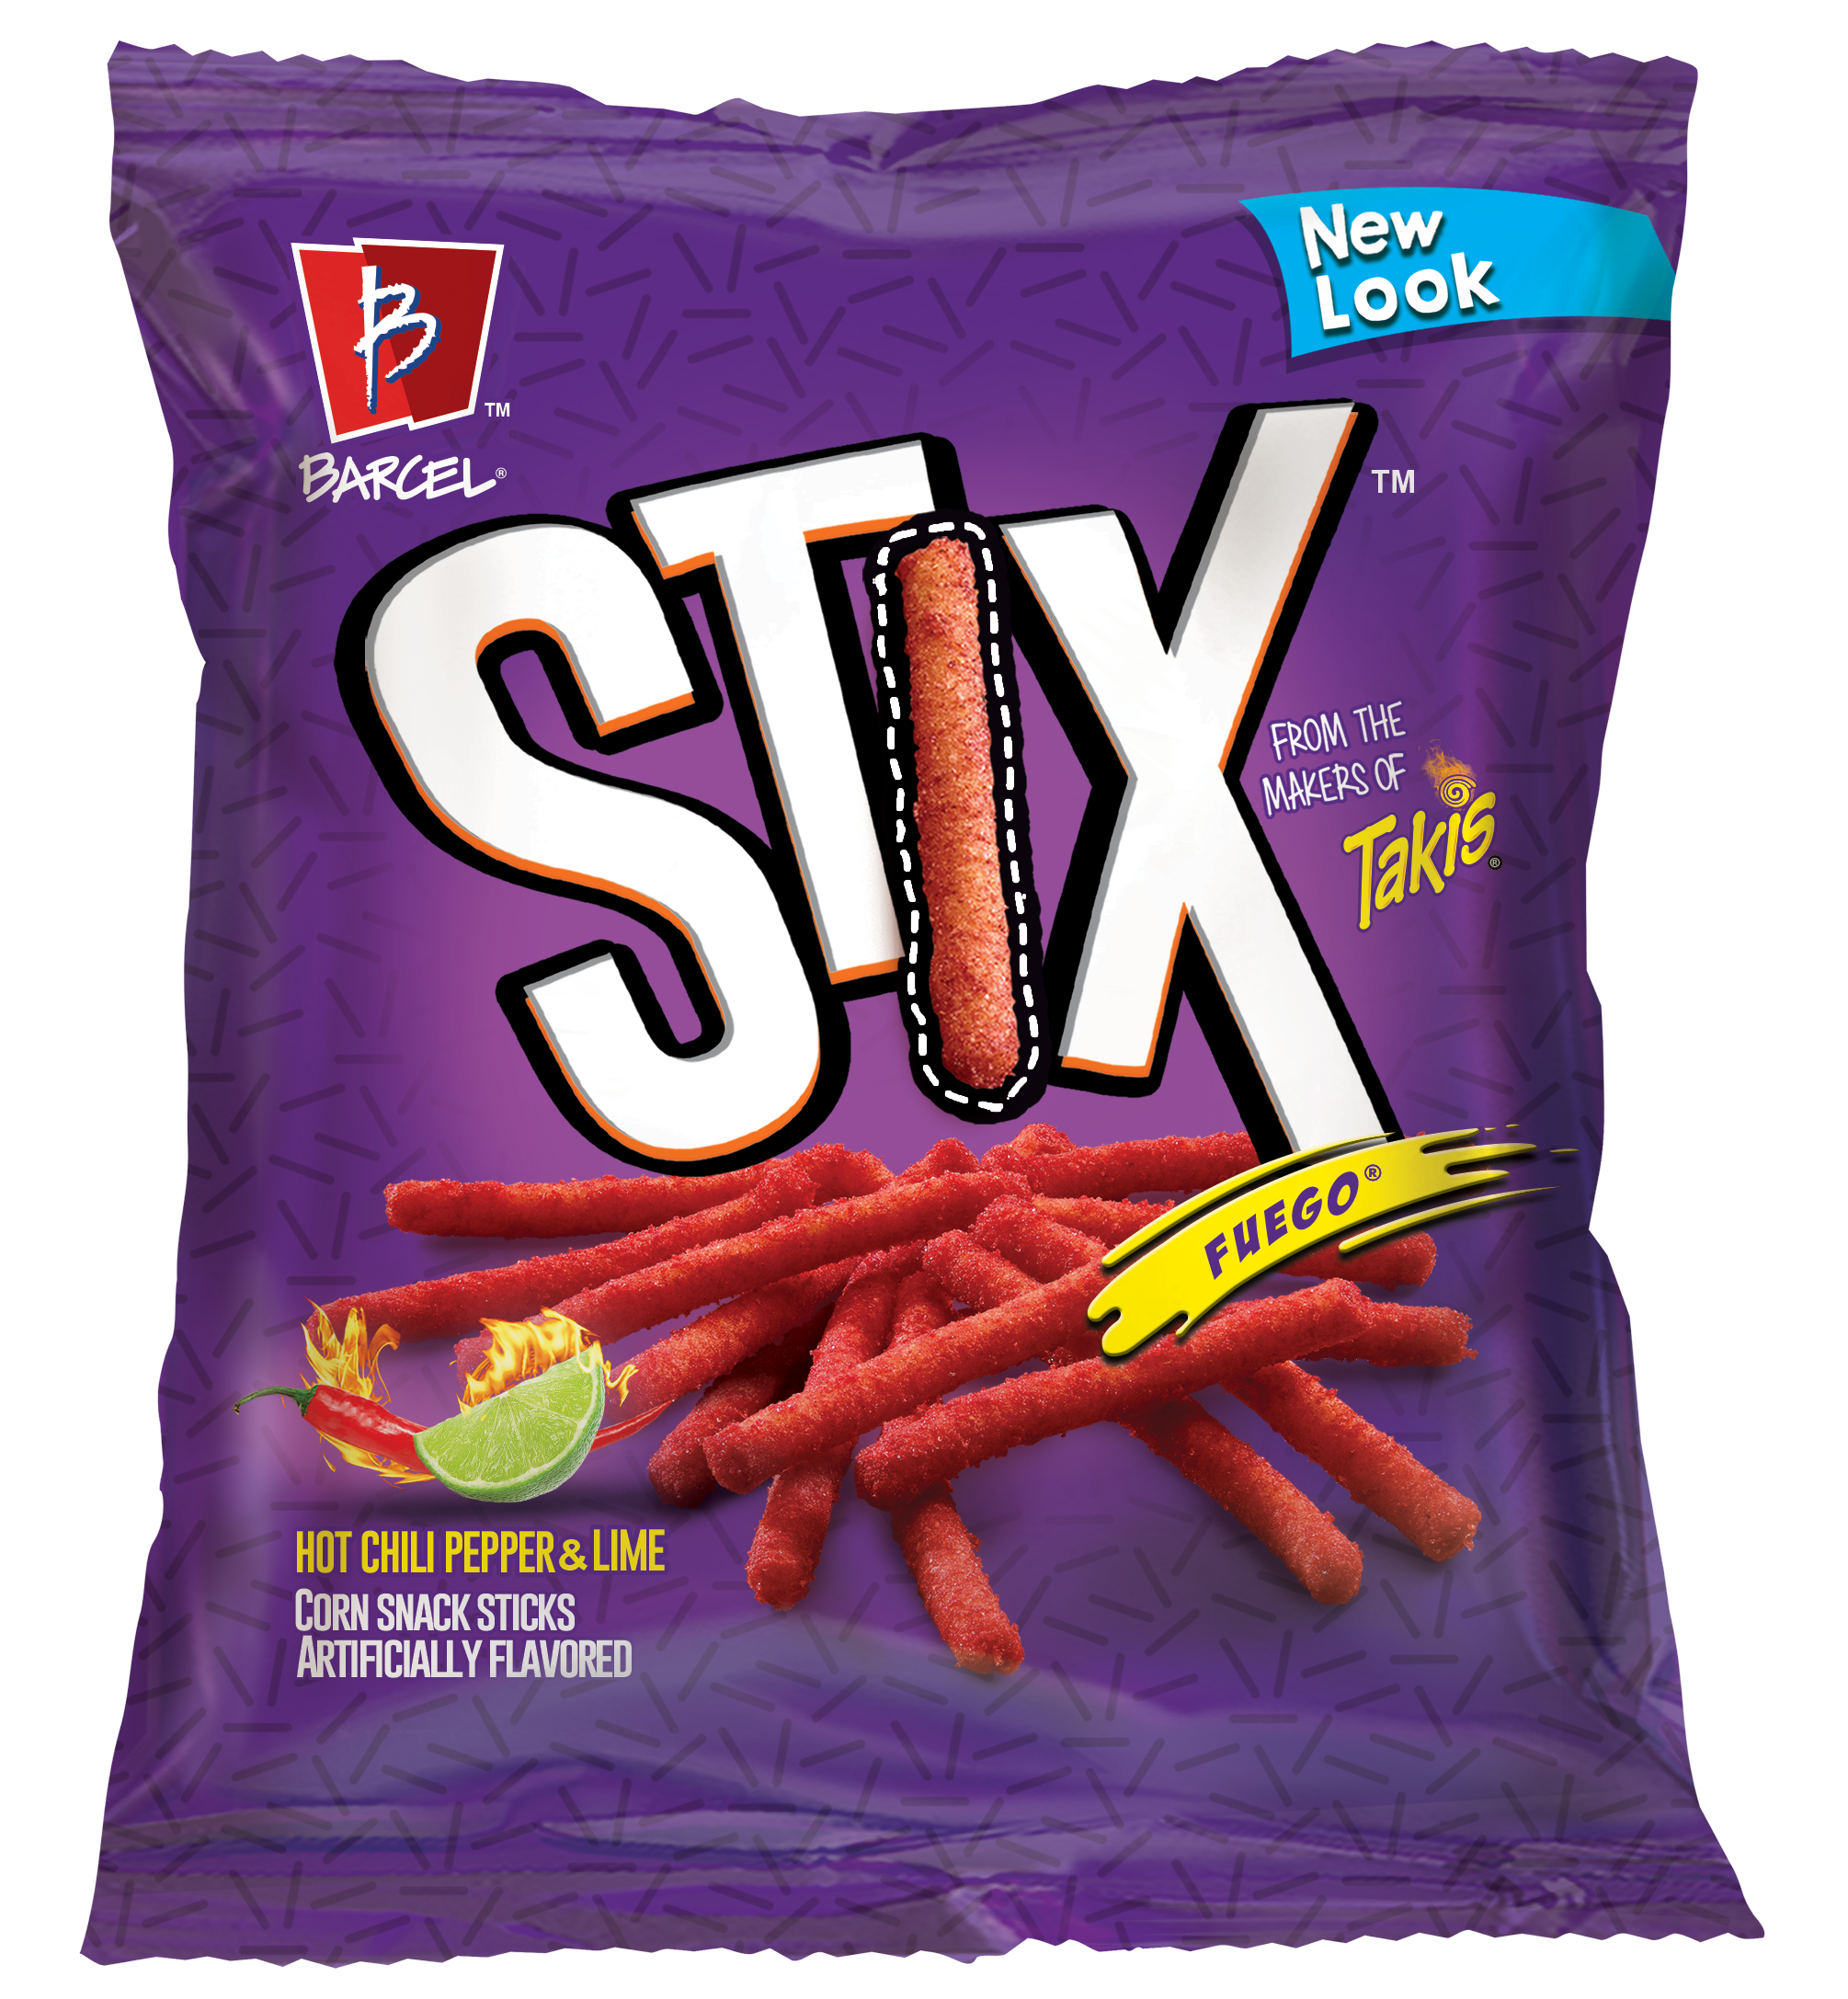 Takis Fuego Stix Hot Chili Pepper & Lime Flavored Spicy Corn Chips, 4 Oz